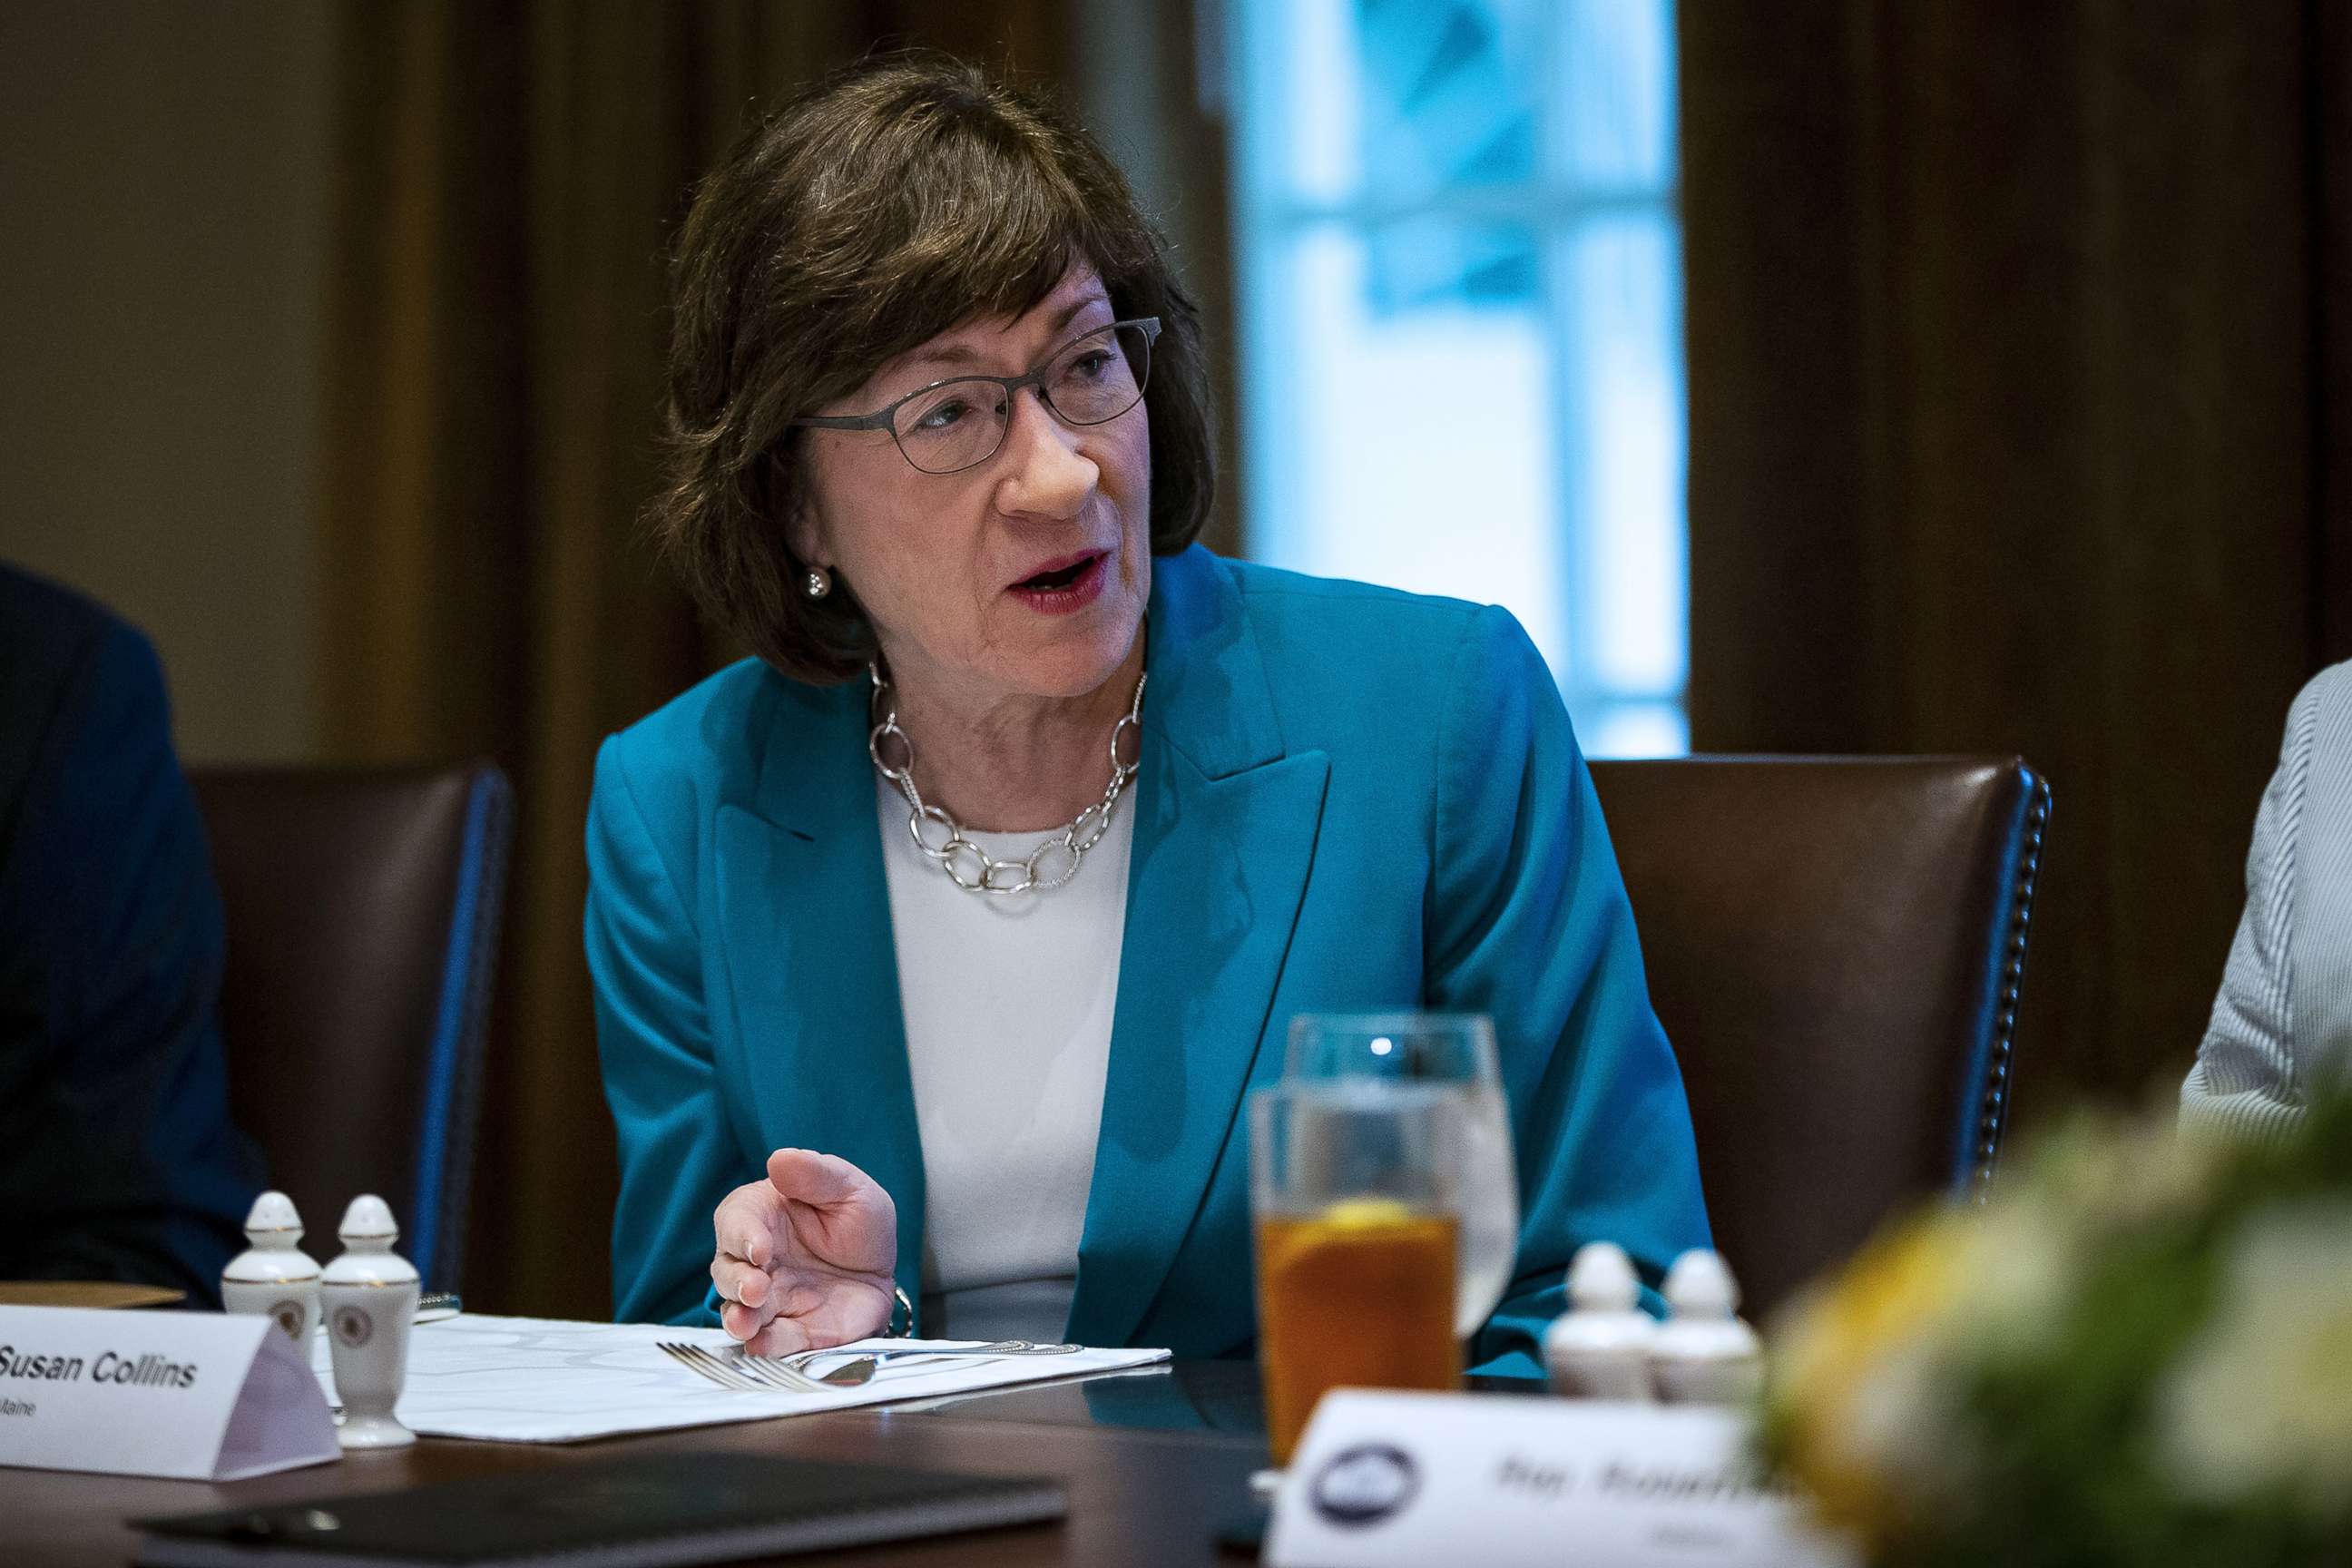 PHOTO: Sen. Susan Collins, R-ME, attends a lunch meeting for Republican lawmakers in the Cabinet Room at the White House on June 26, 2018 in Washington, D.C.